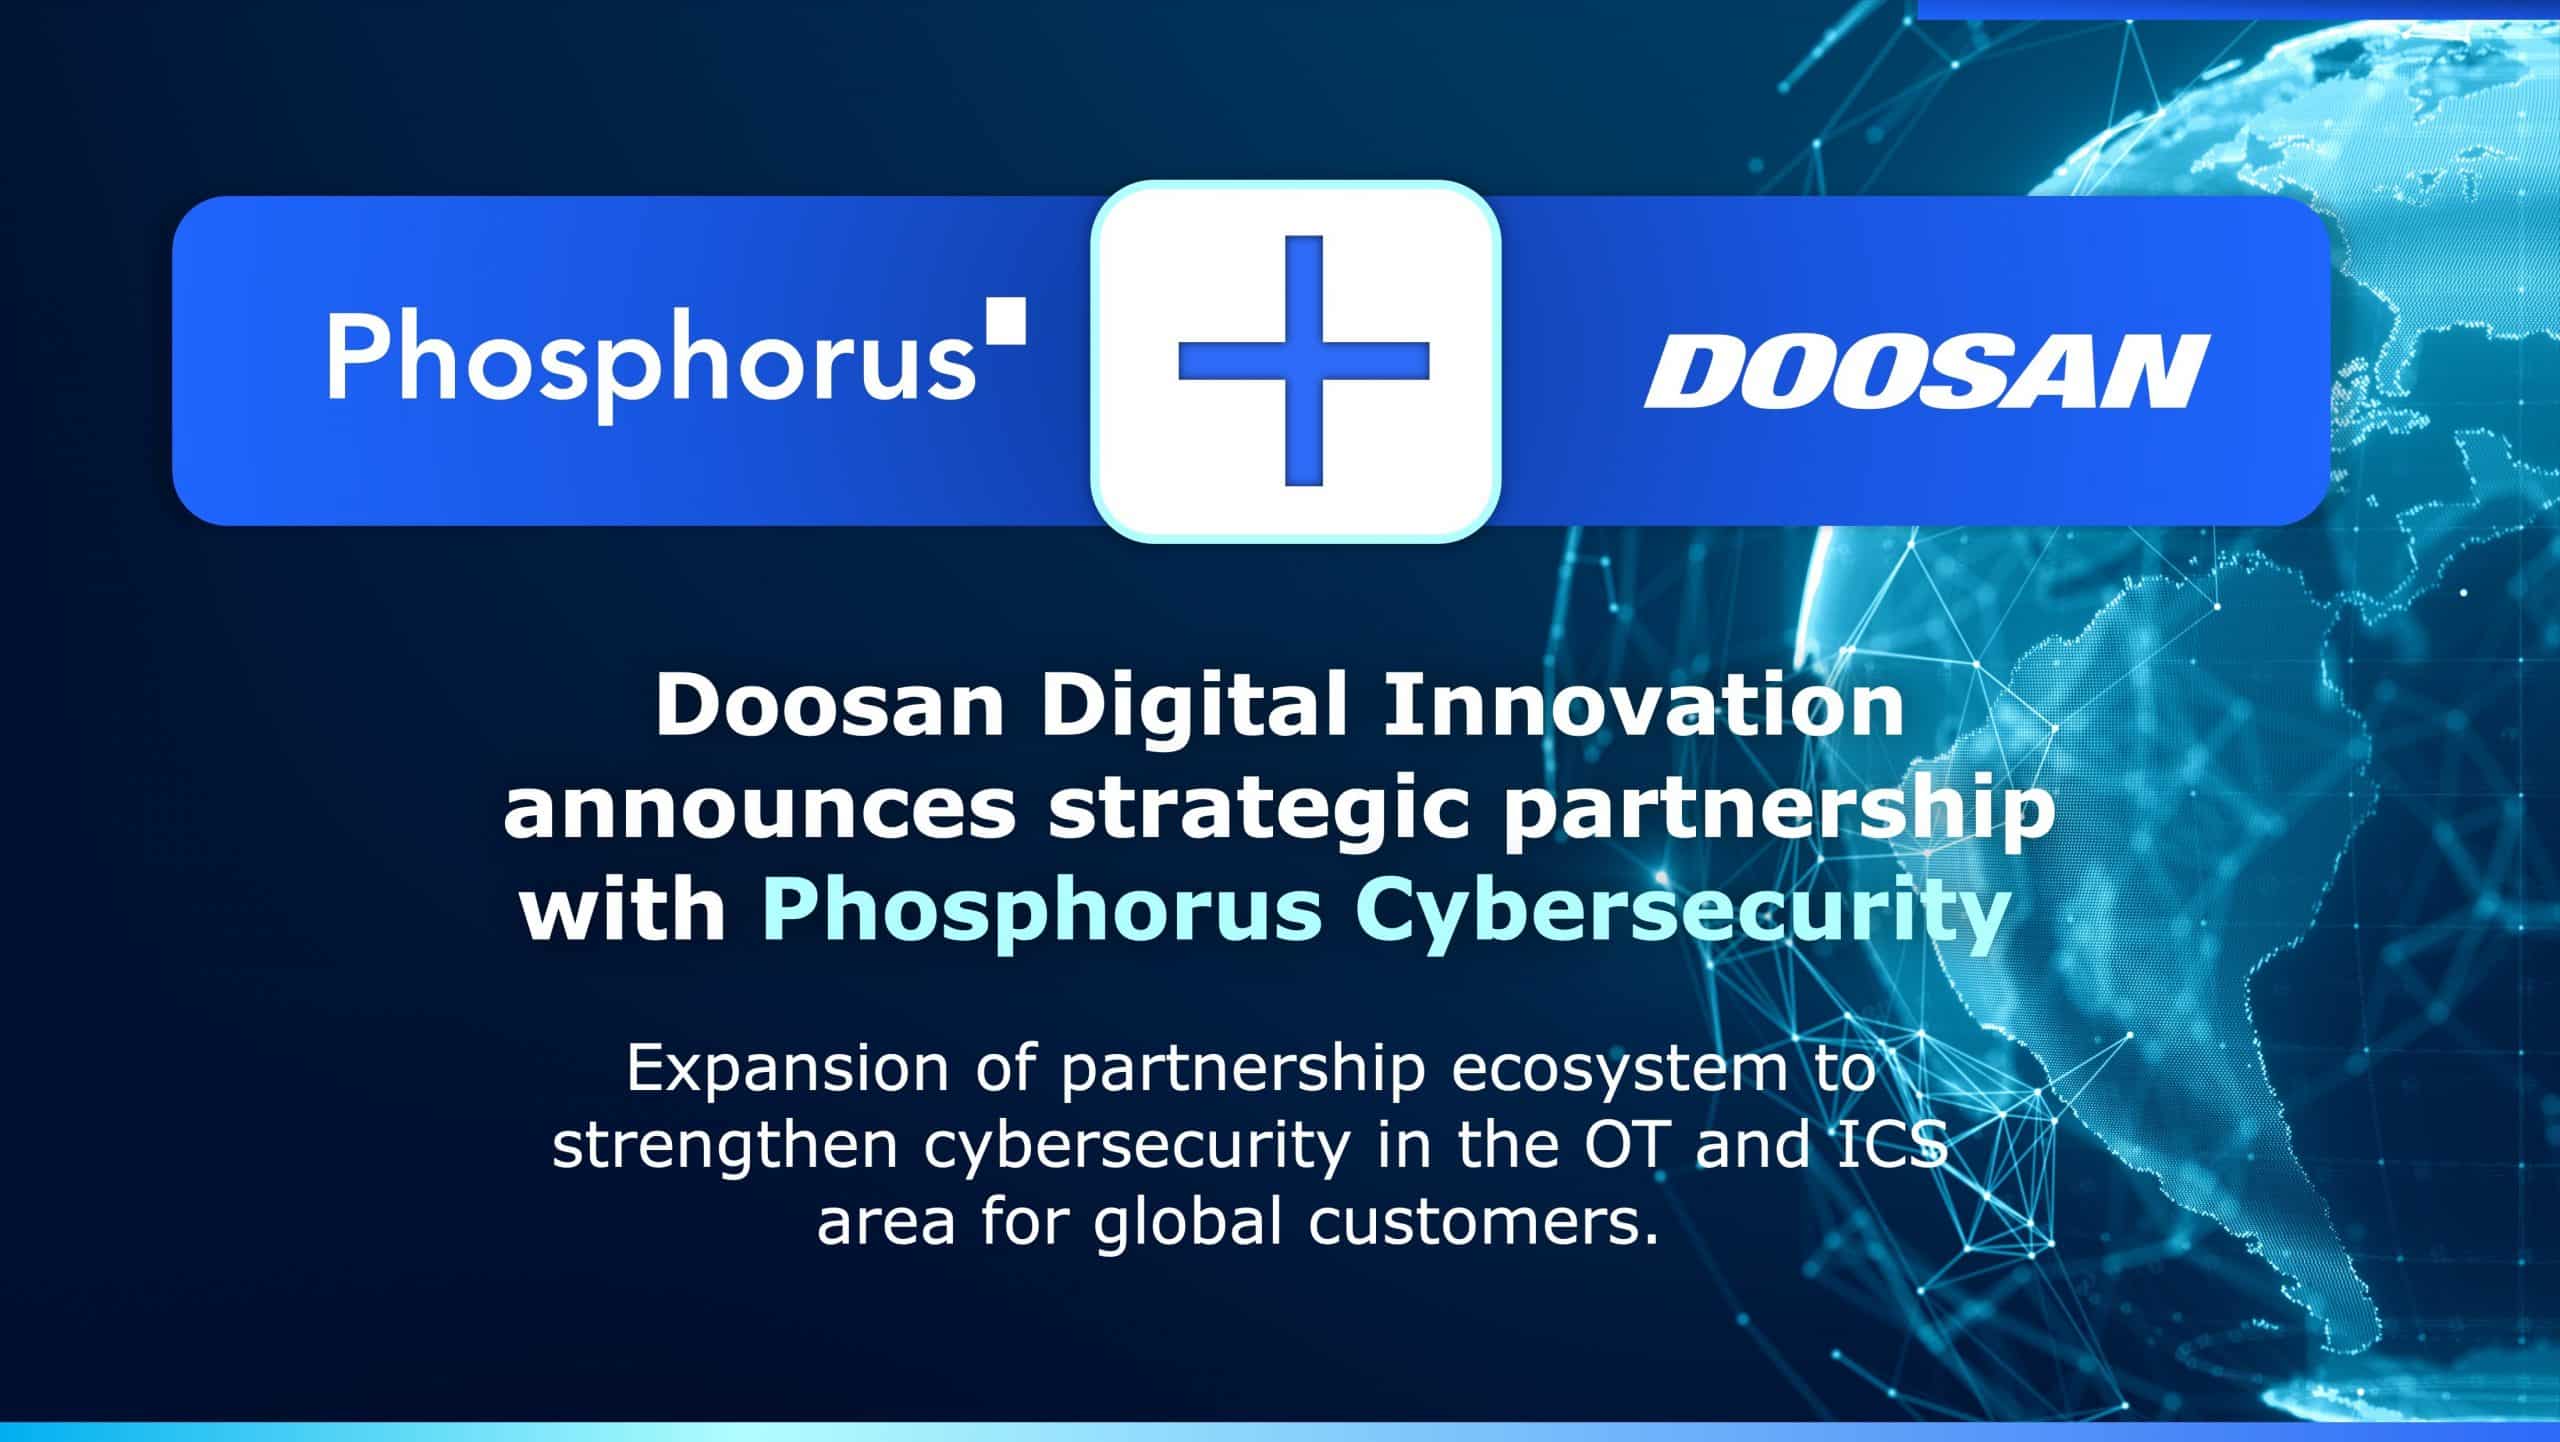 Through partnership with Phosphorus, Doosan strengthens its OT cybersecurity partner ecosystem to secure xIoT and OT global companies.